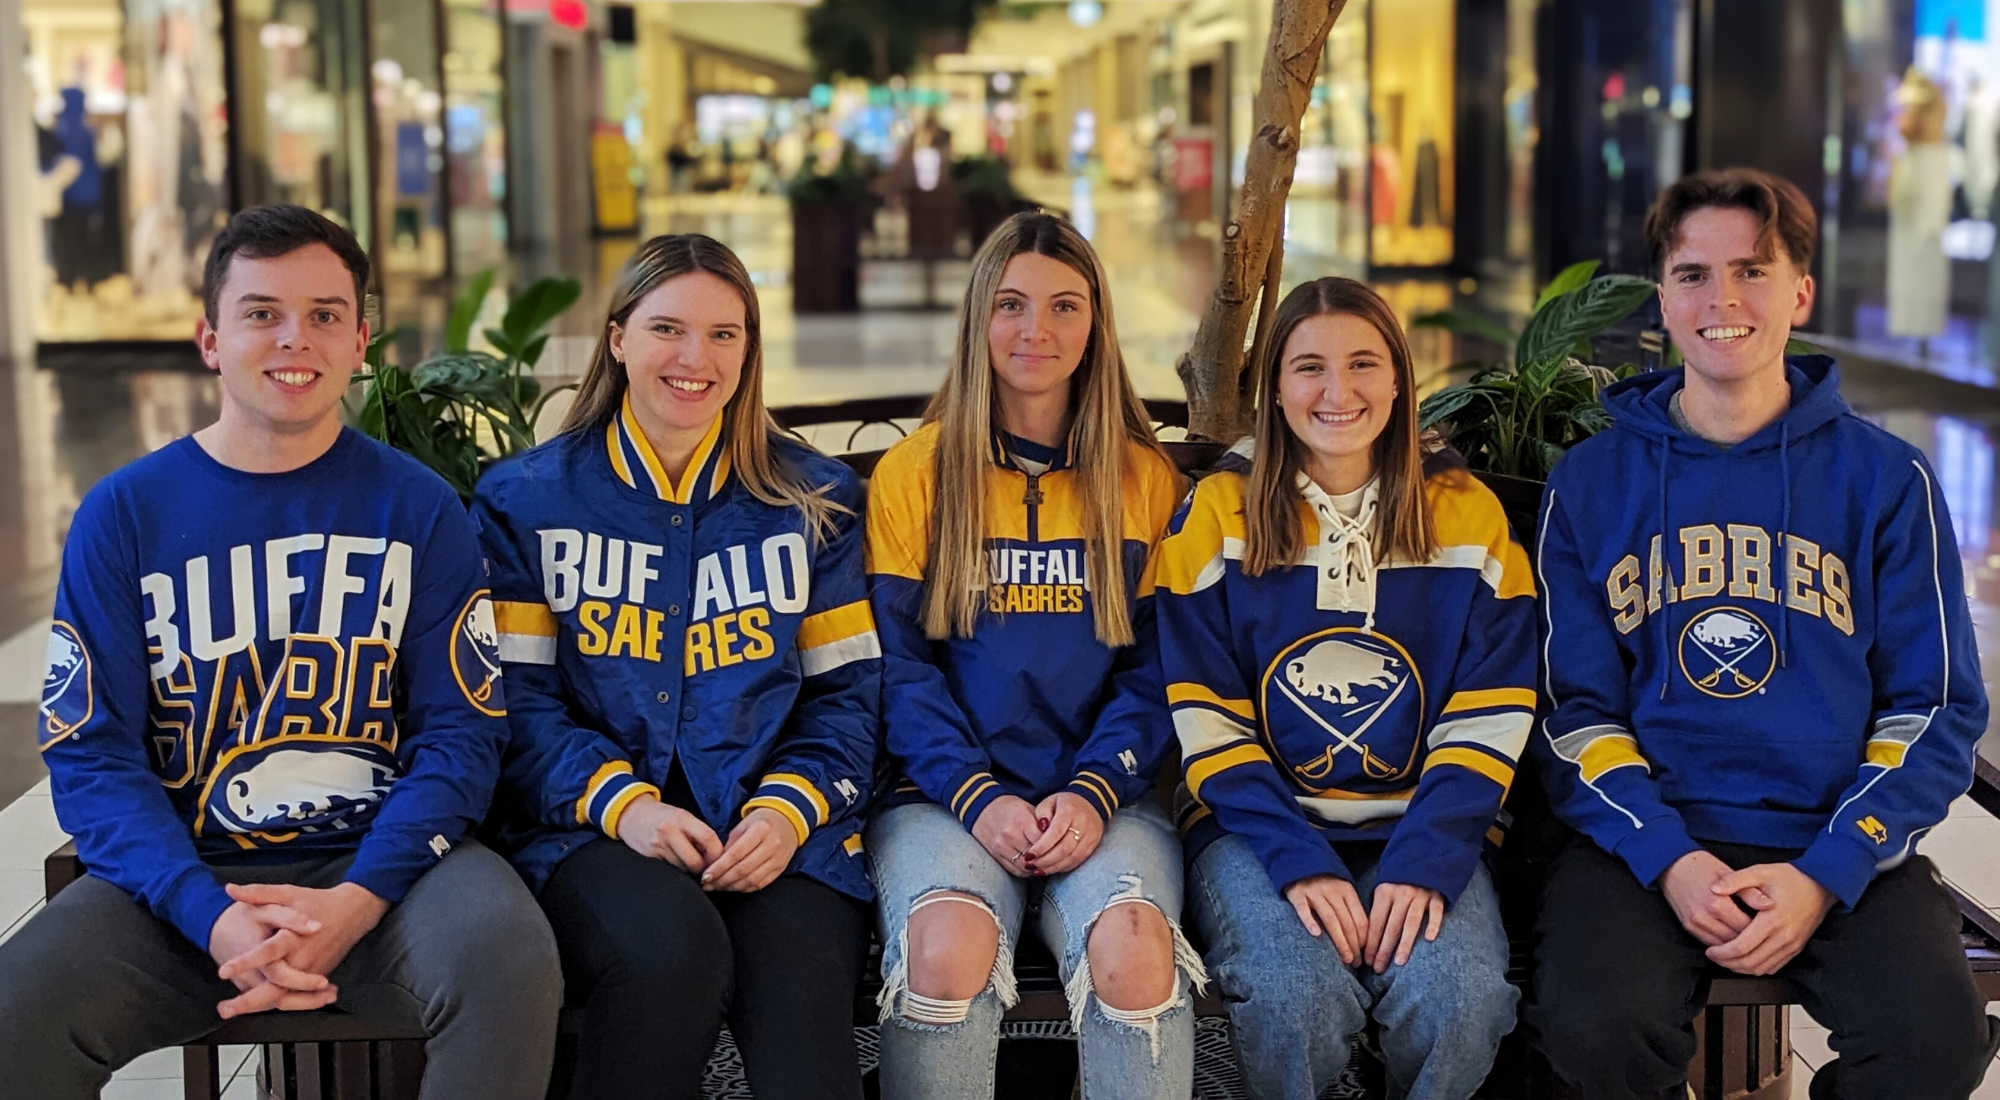 Five individuals sitting on a bench in the mall posing for a picture wearing buffalo sabres apparel